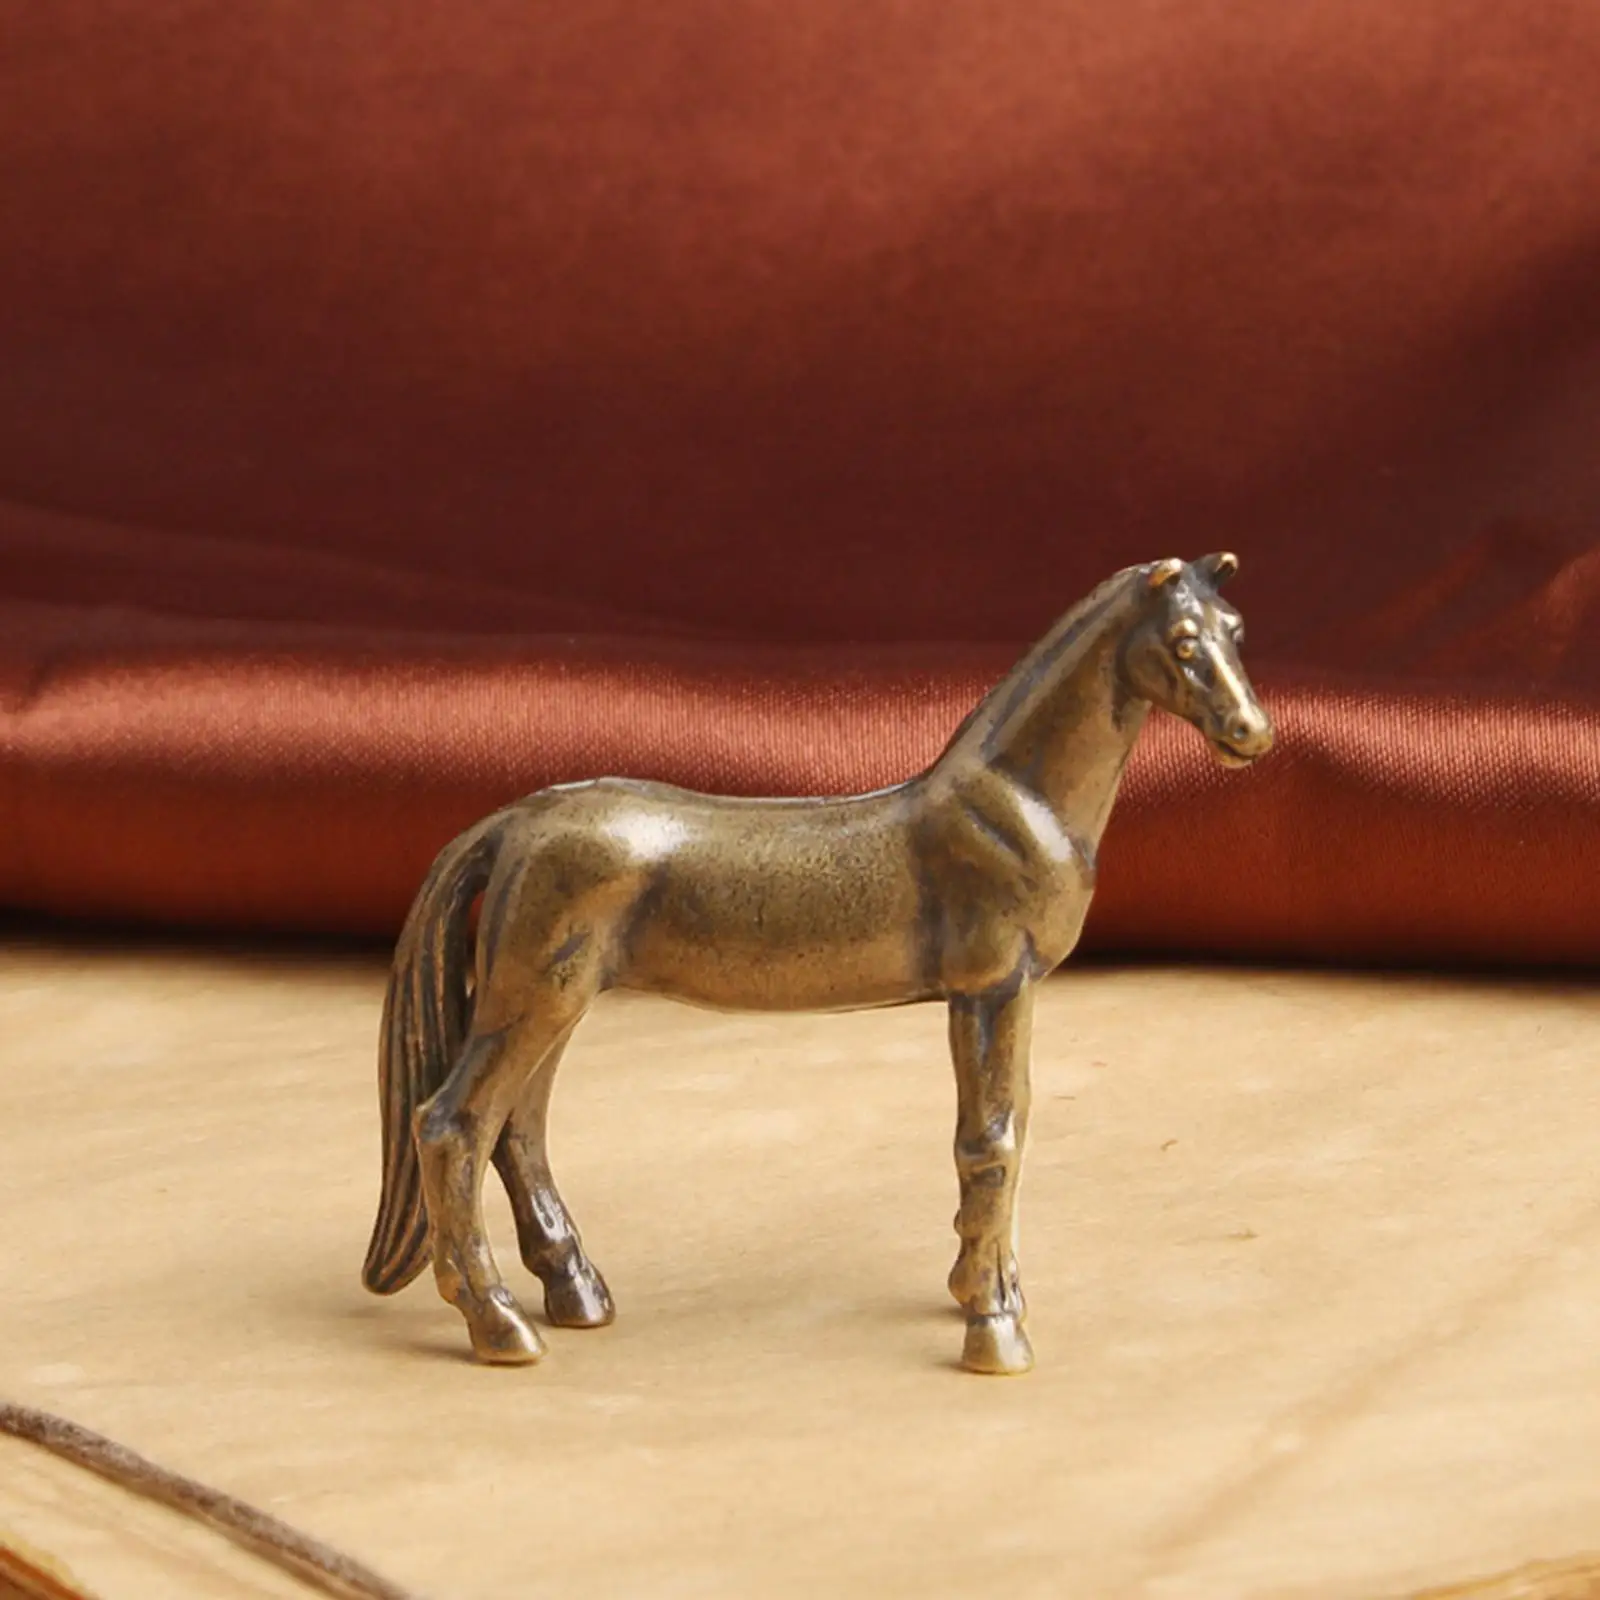 Mini Standing Horse Statue,Crafts Figurines Animal, Horse Sculpture,Office Home